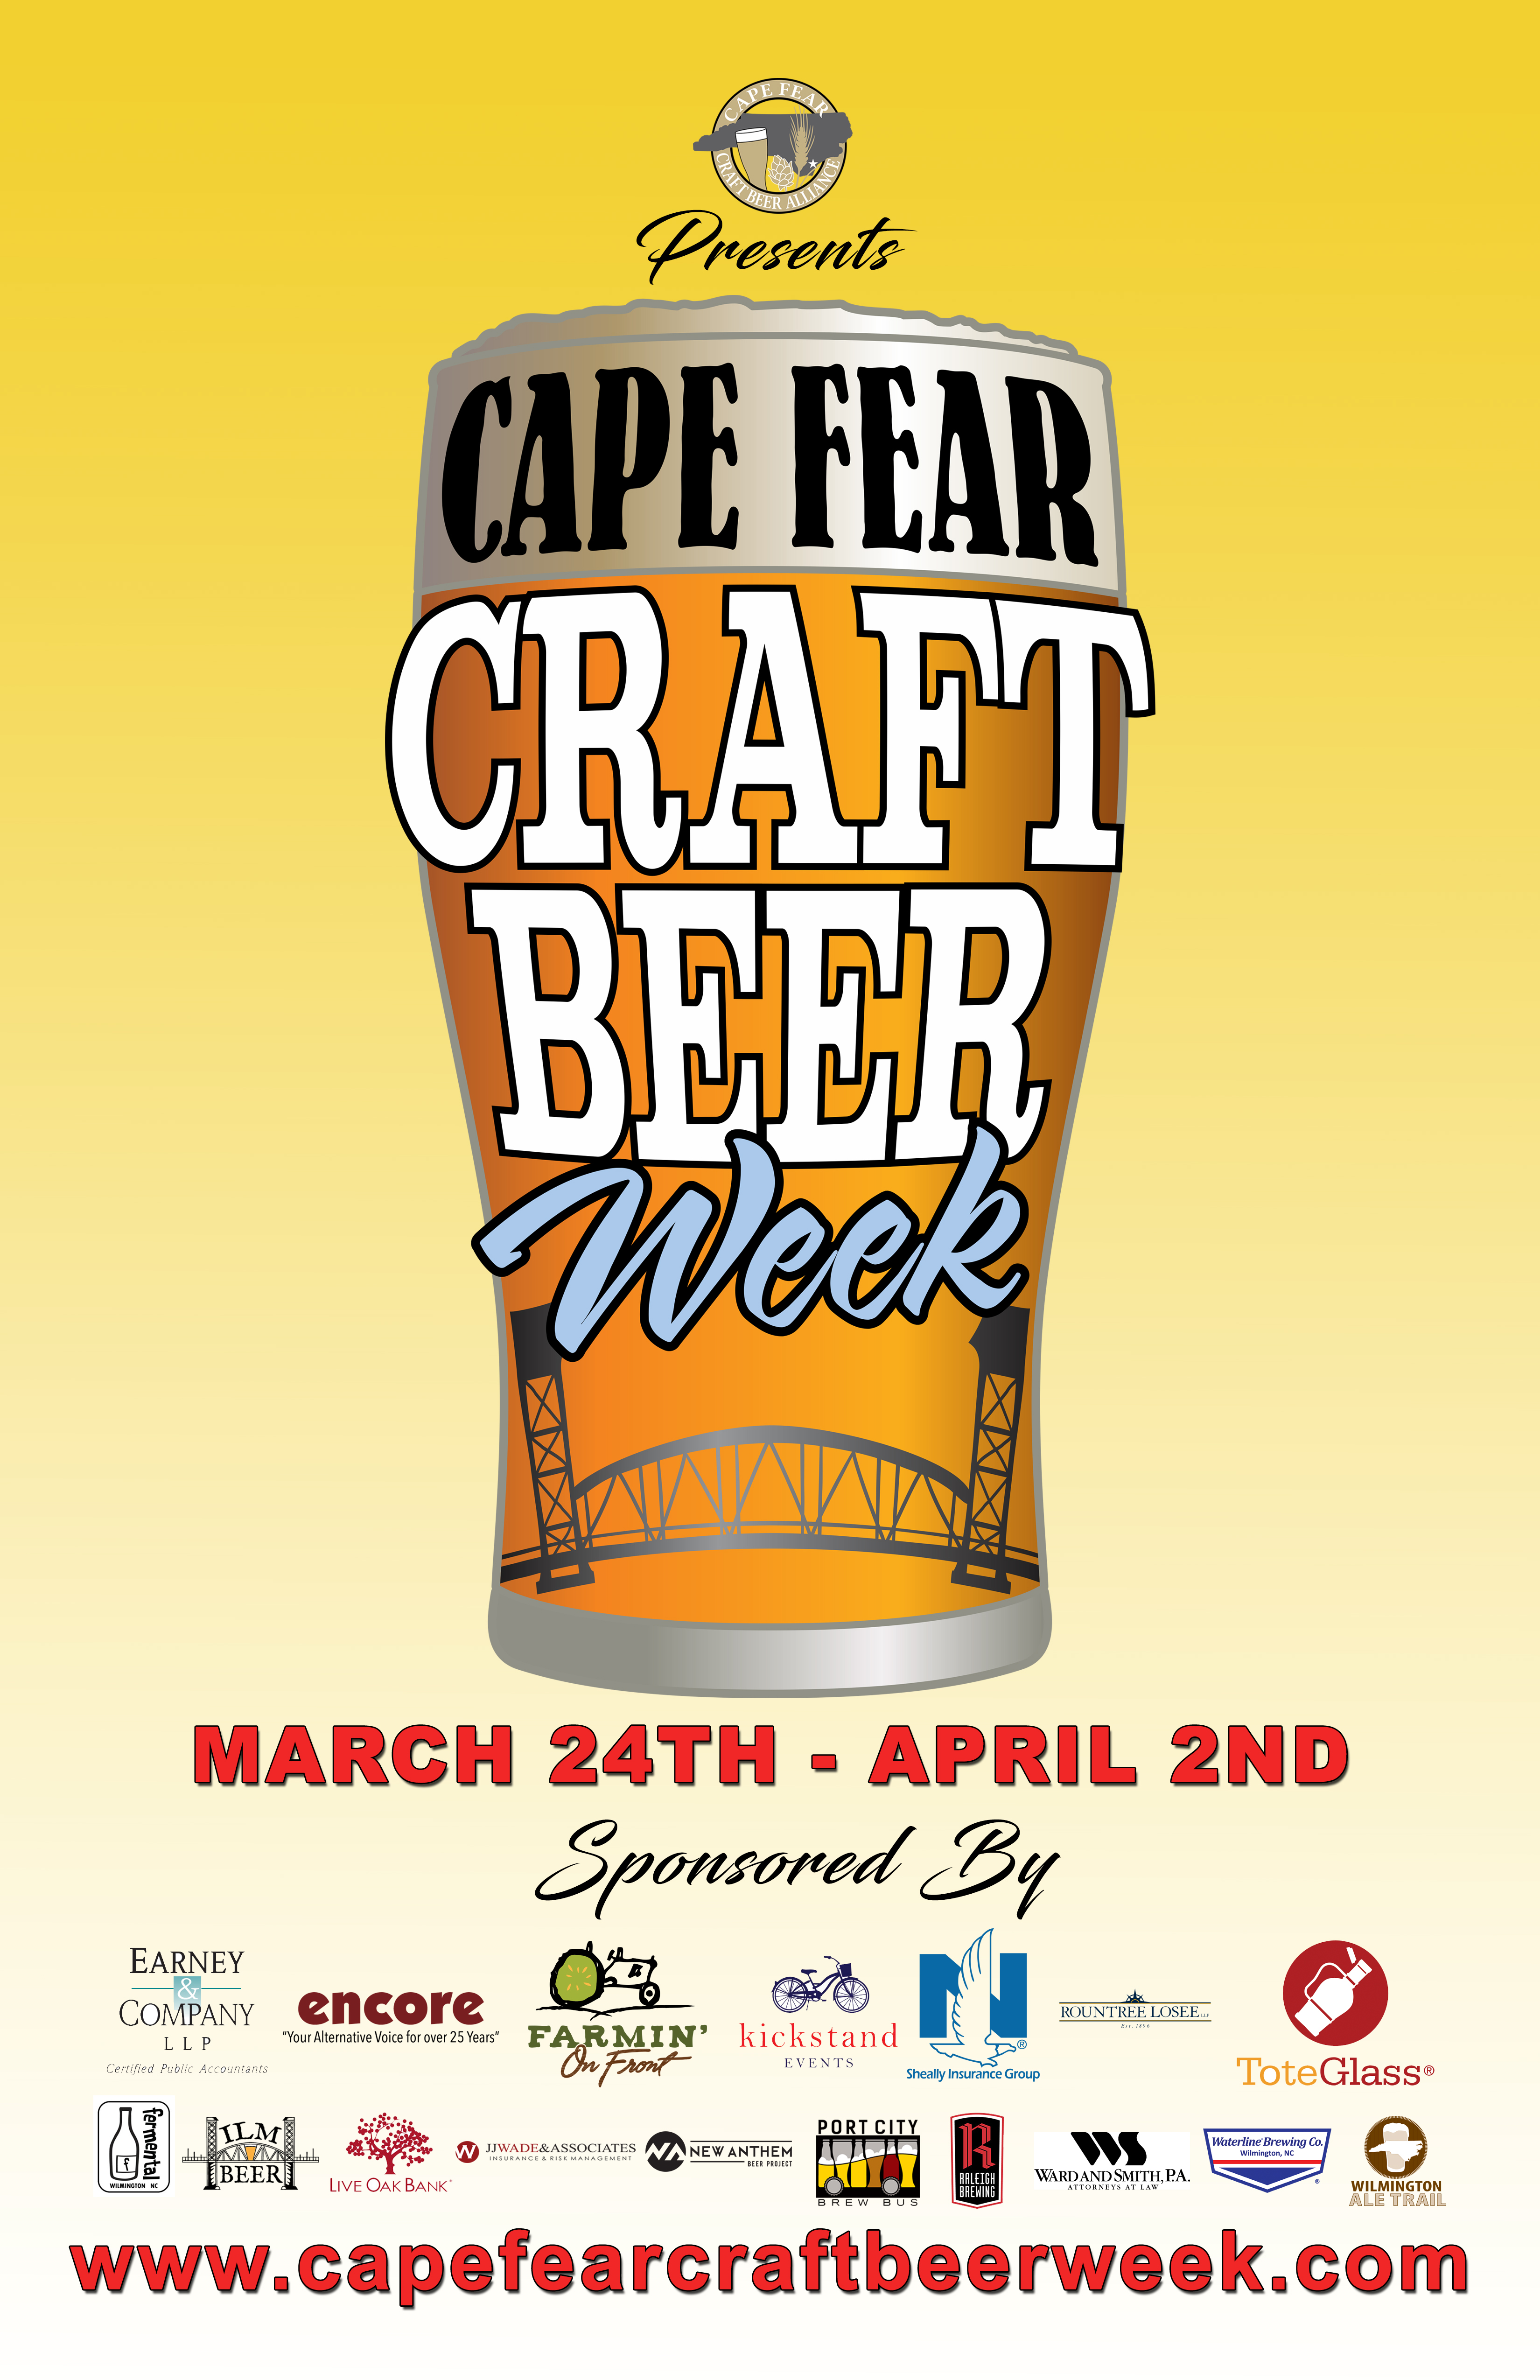 Cape Fear Craft Beer Week Poster